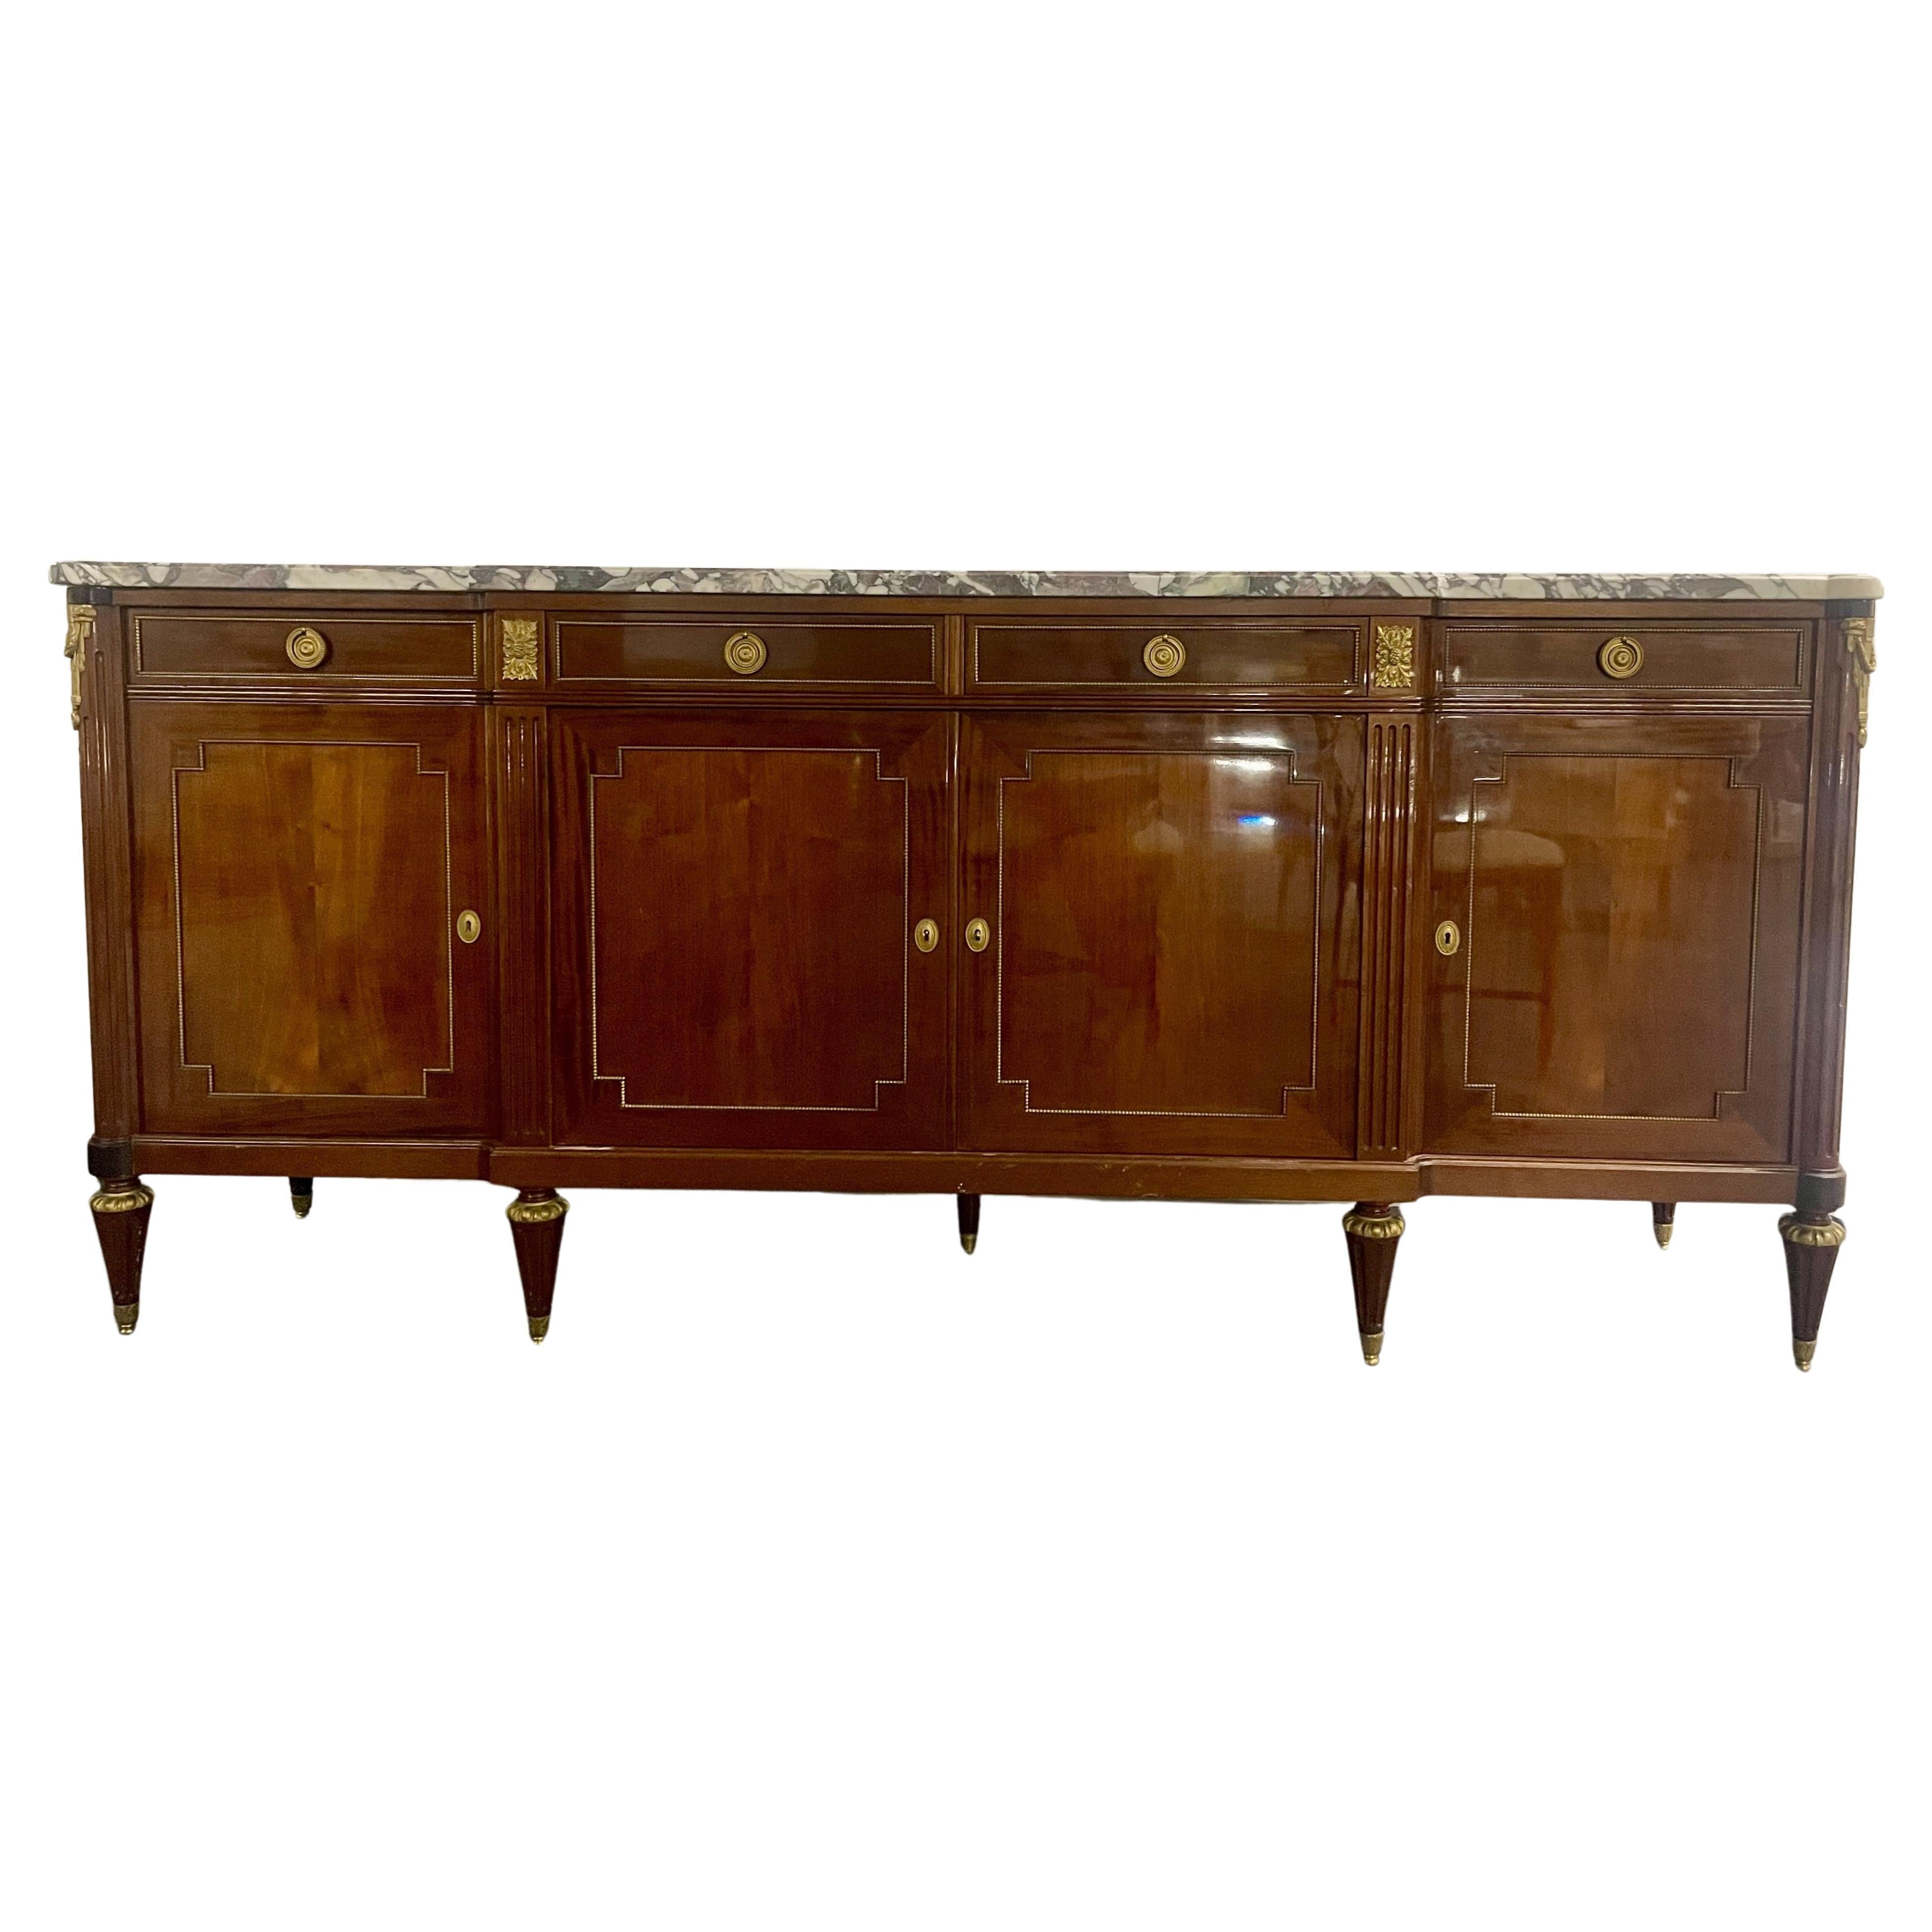 Maison Jansen Louis XVI Style Sideboard, Cabinet, Credenza, Bronze, Marble Top For Sale